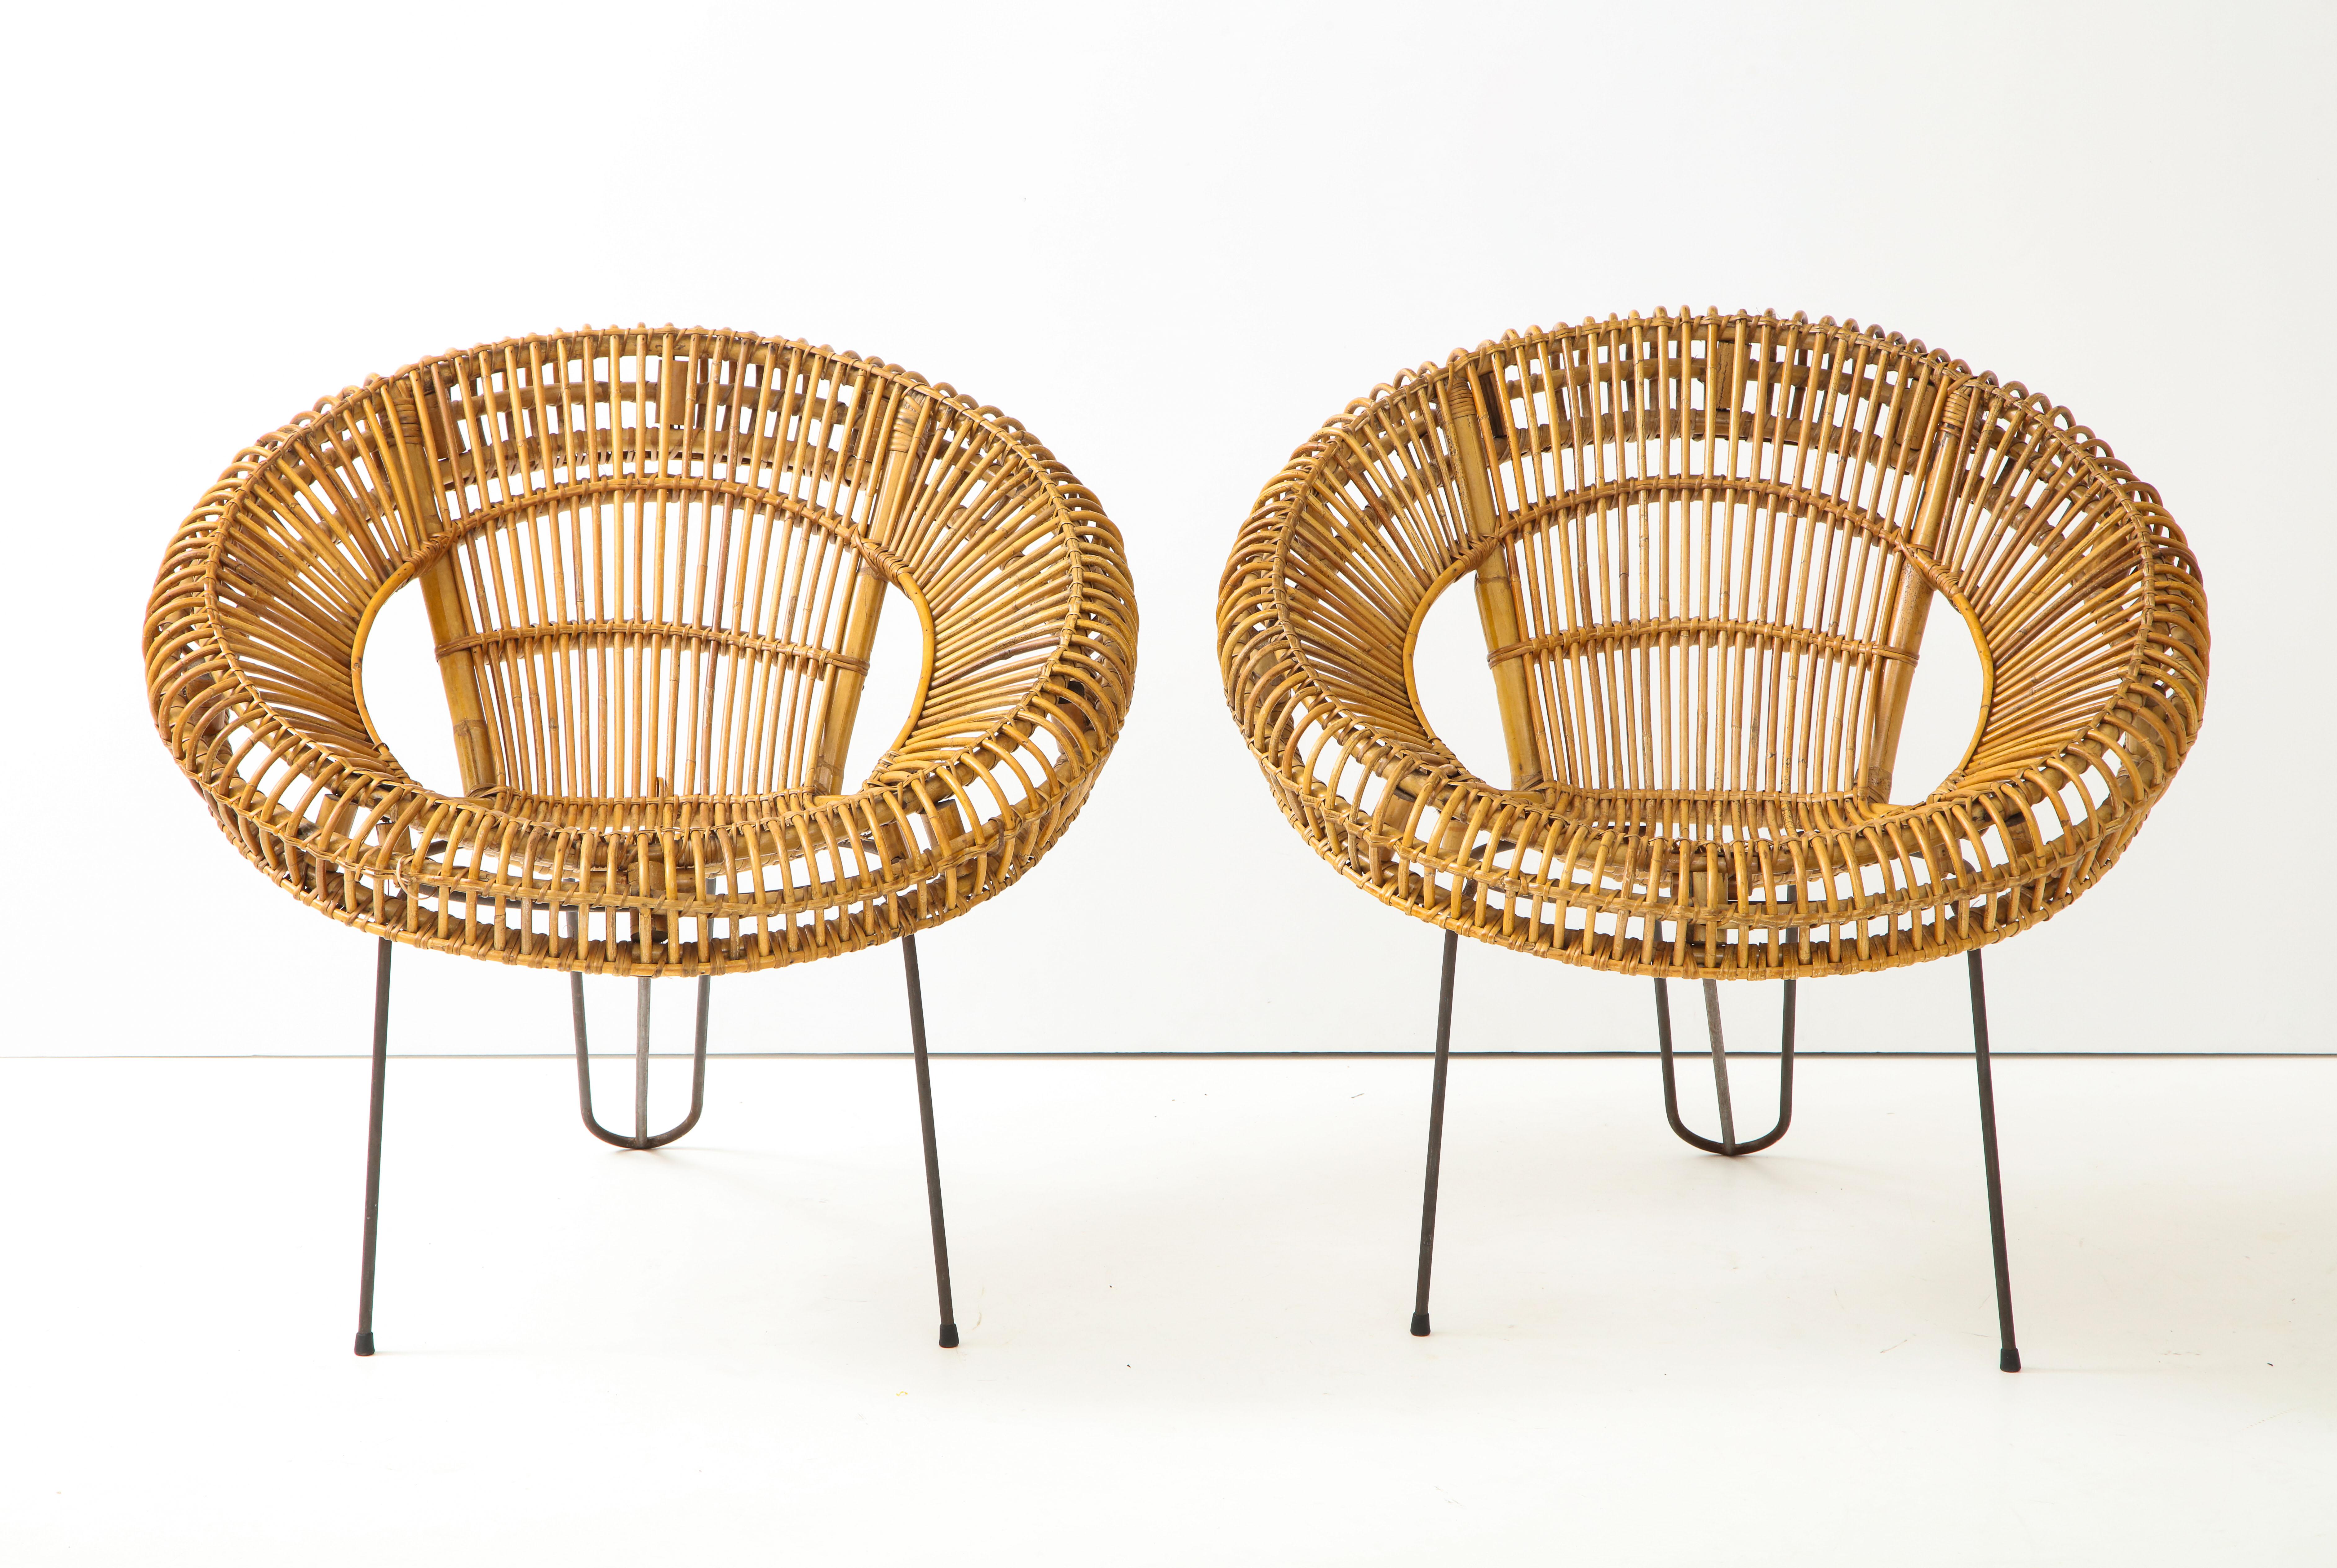 Janine Abraham & Dirk Jan Rol, Italy, 1950s
Rare pair of chairs
Rattan and wicker, metal base
Measures: H 29 D 30 W 30 in.
  